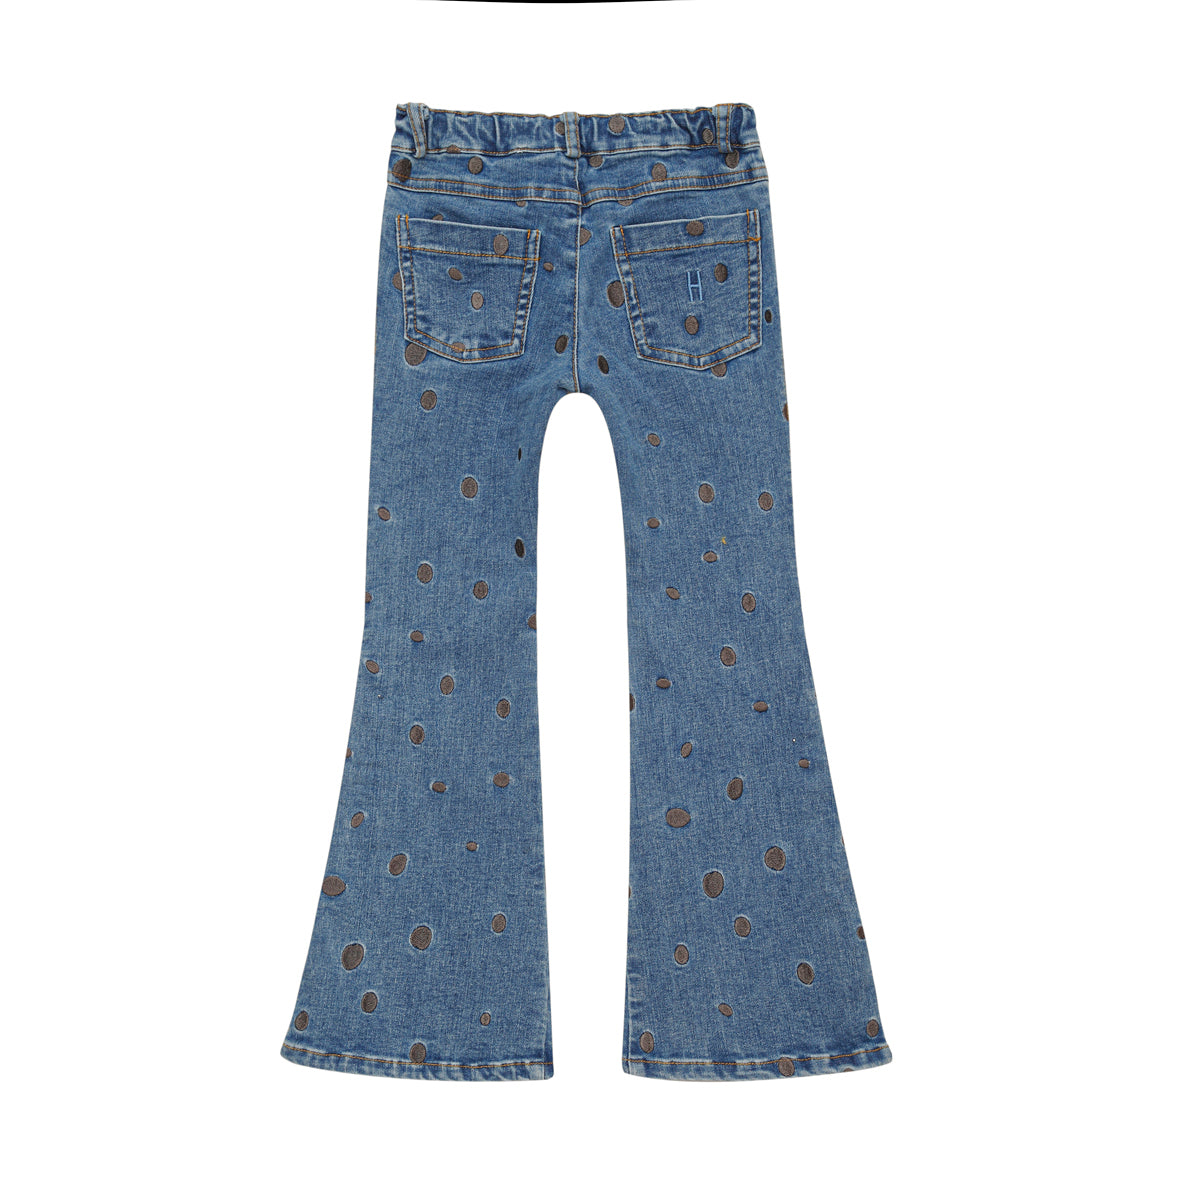 5 Pocket Flared Bailey Light Blue Denim with dots Jeans Little Hedonist